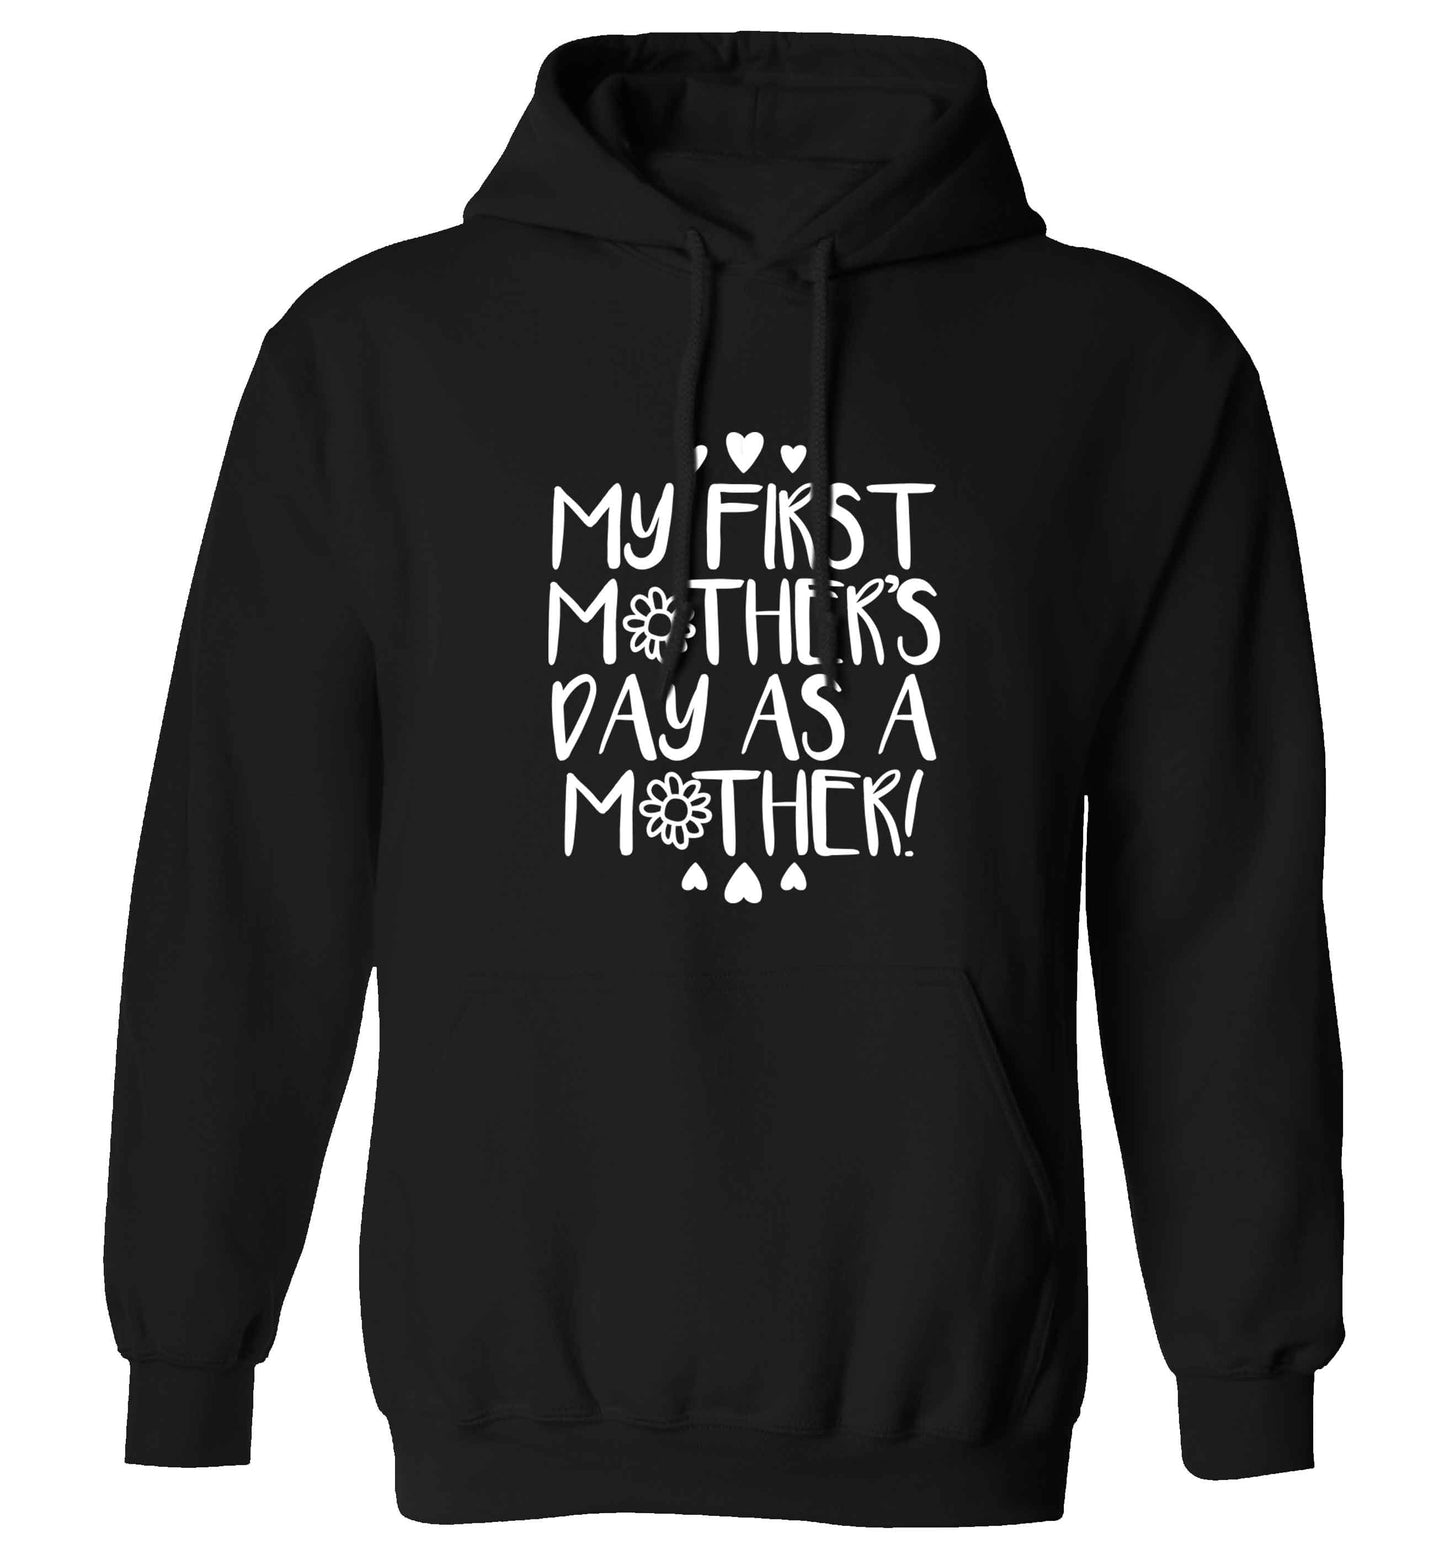 It's my first mother's day as a mother adults unisex black hoodie 2XL